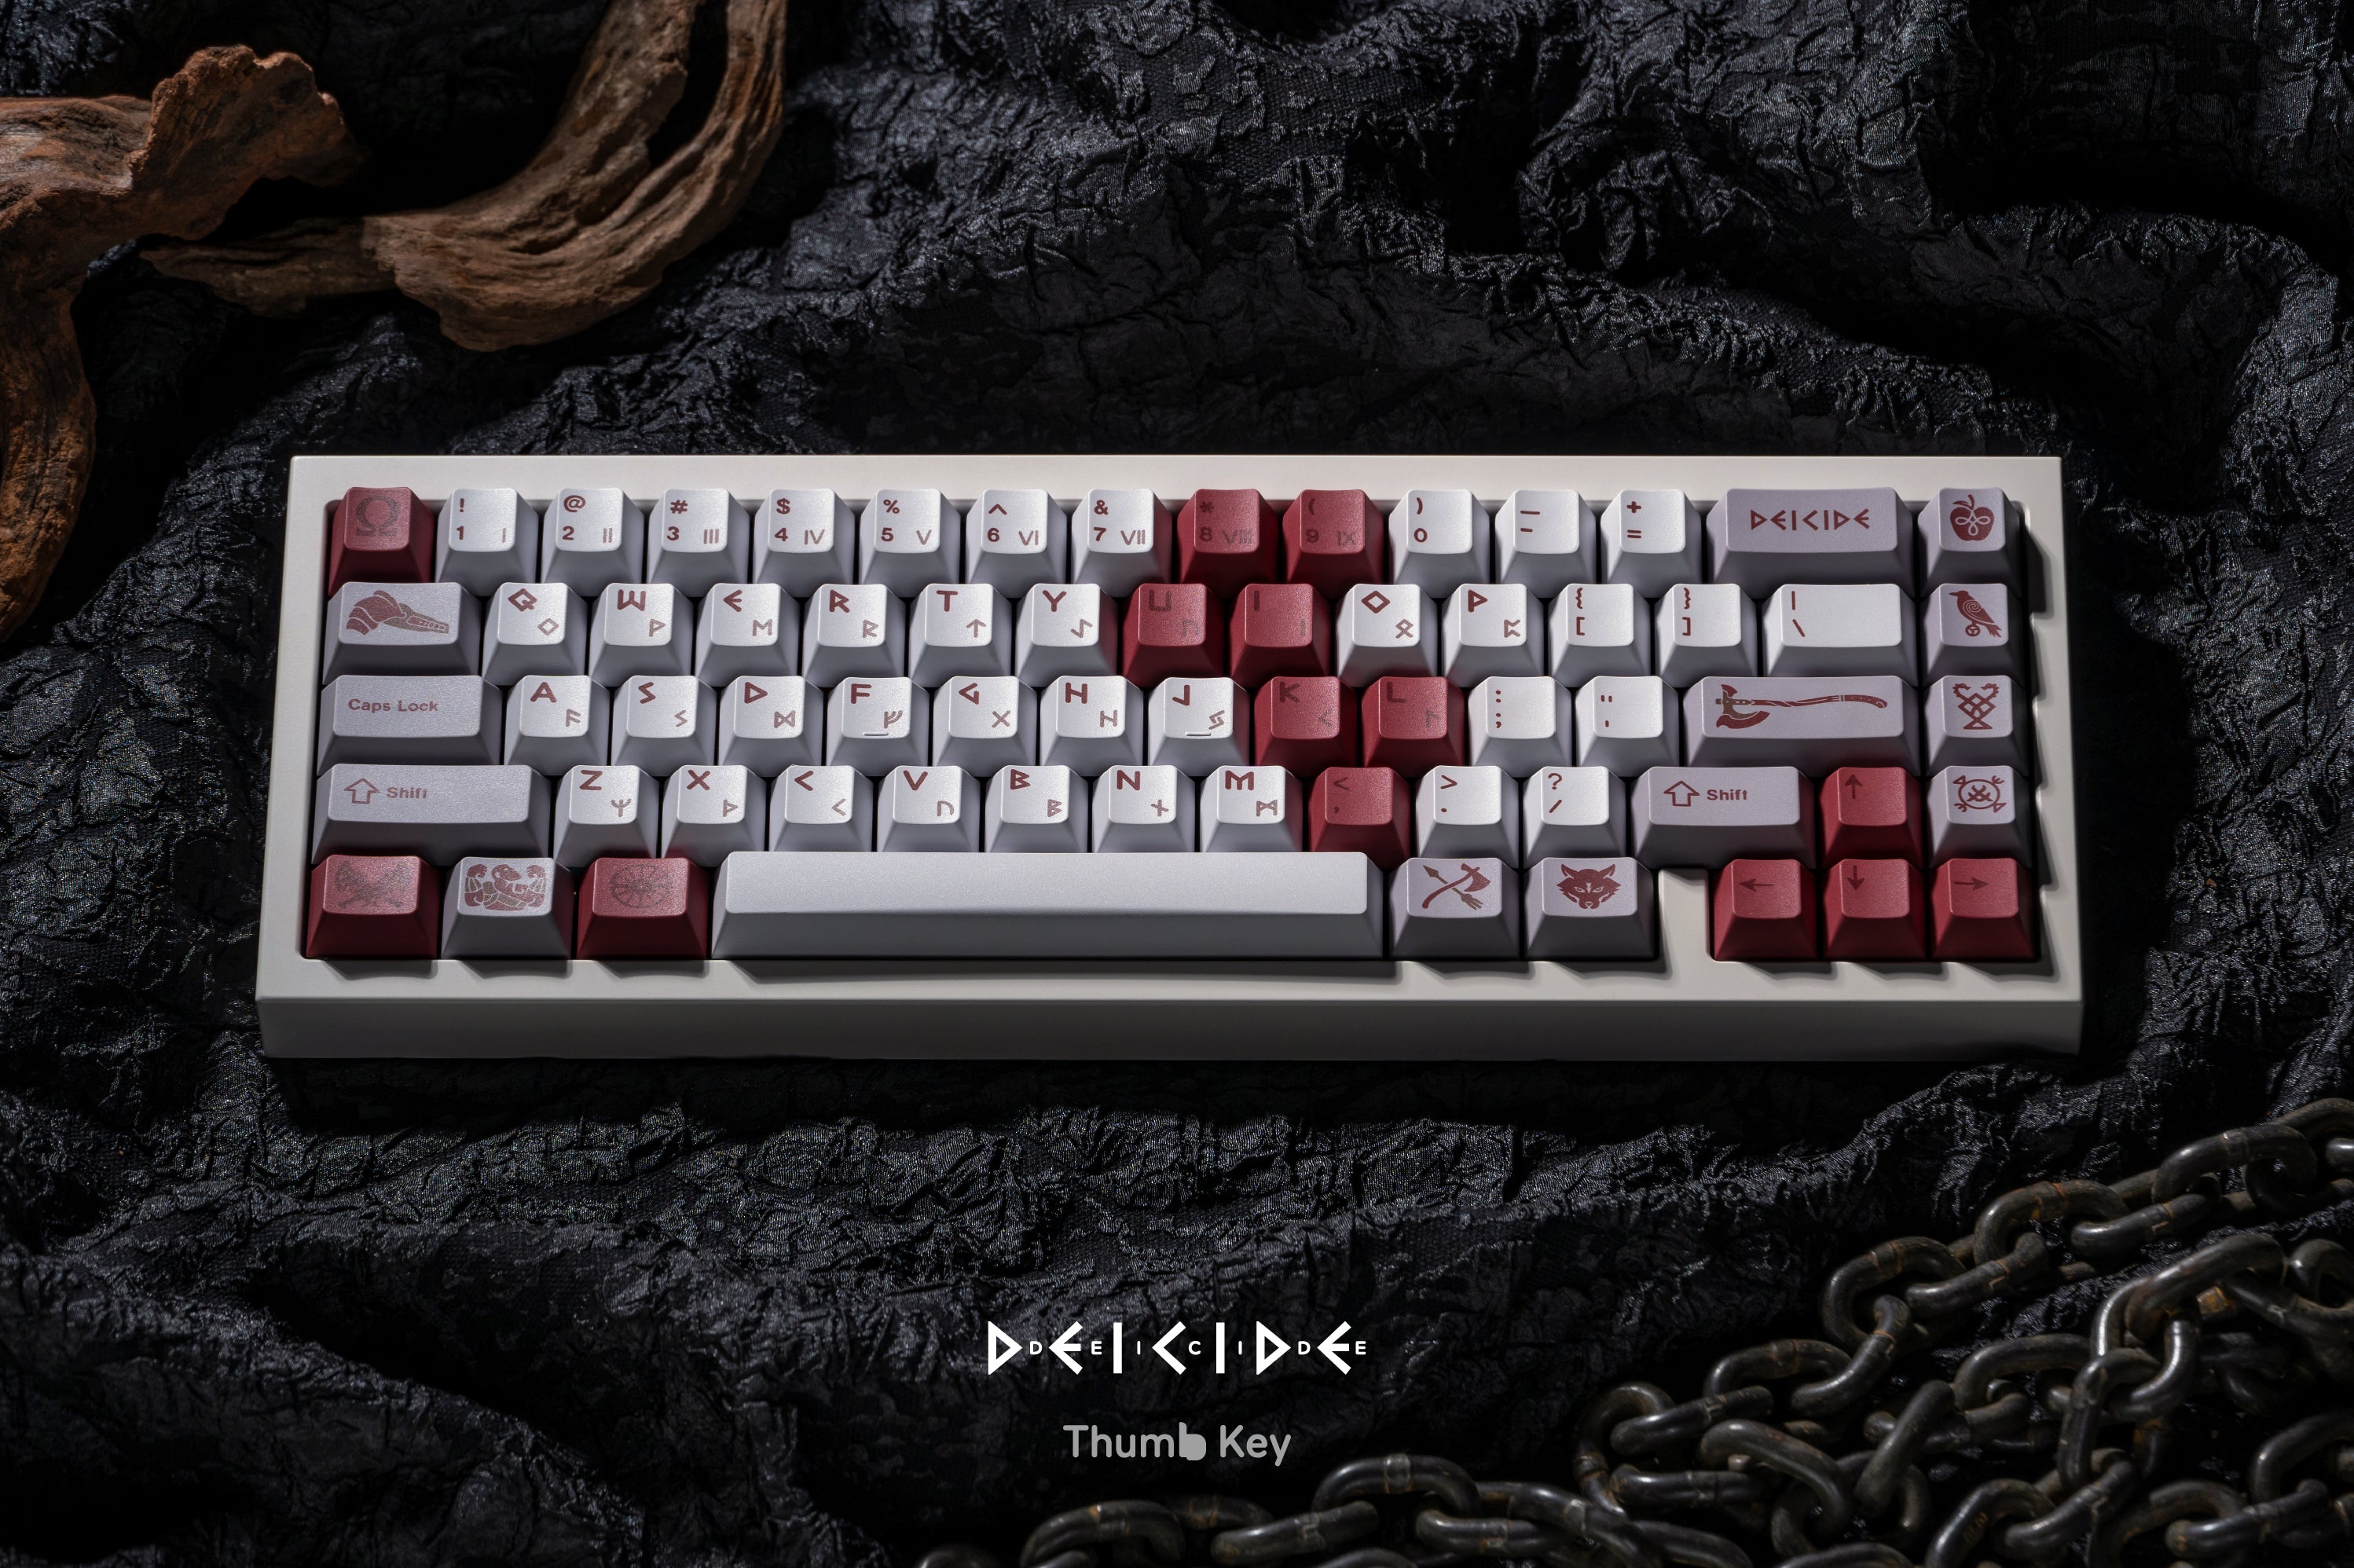 [Coming Soon] DMK Deicide Keycaps by Thumb Key - KeebsForAll